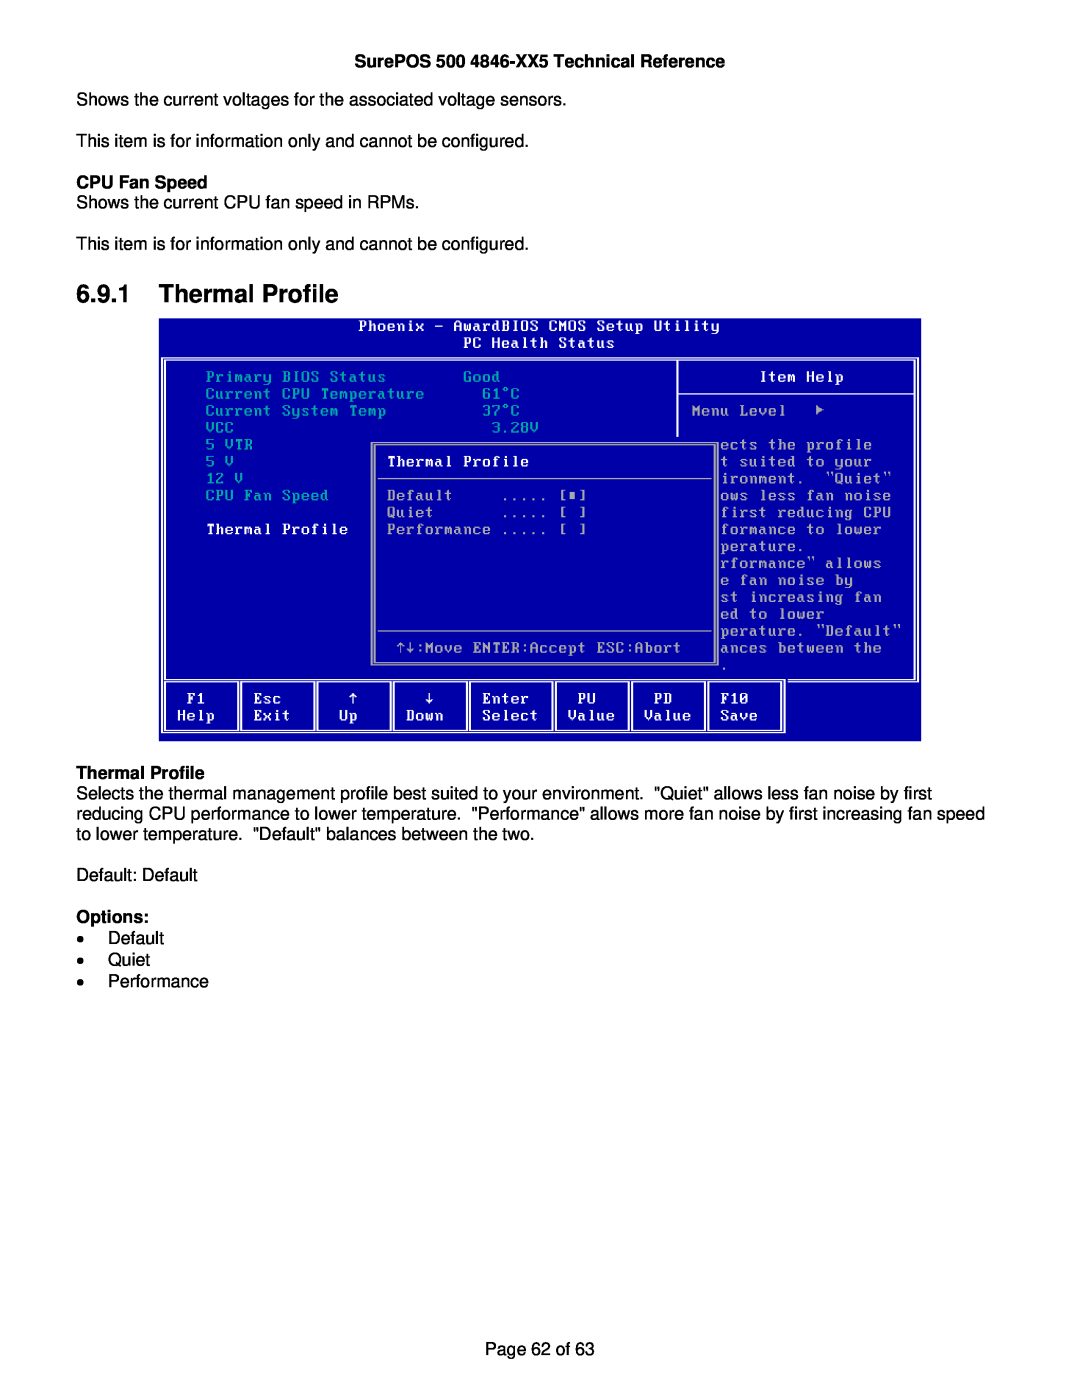 IBM manual Thermal Profile, SurePOS 500 4846-XX5 Technical Reference, CPU Fan Speed, Options 